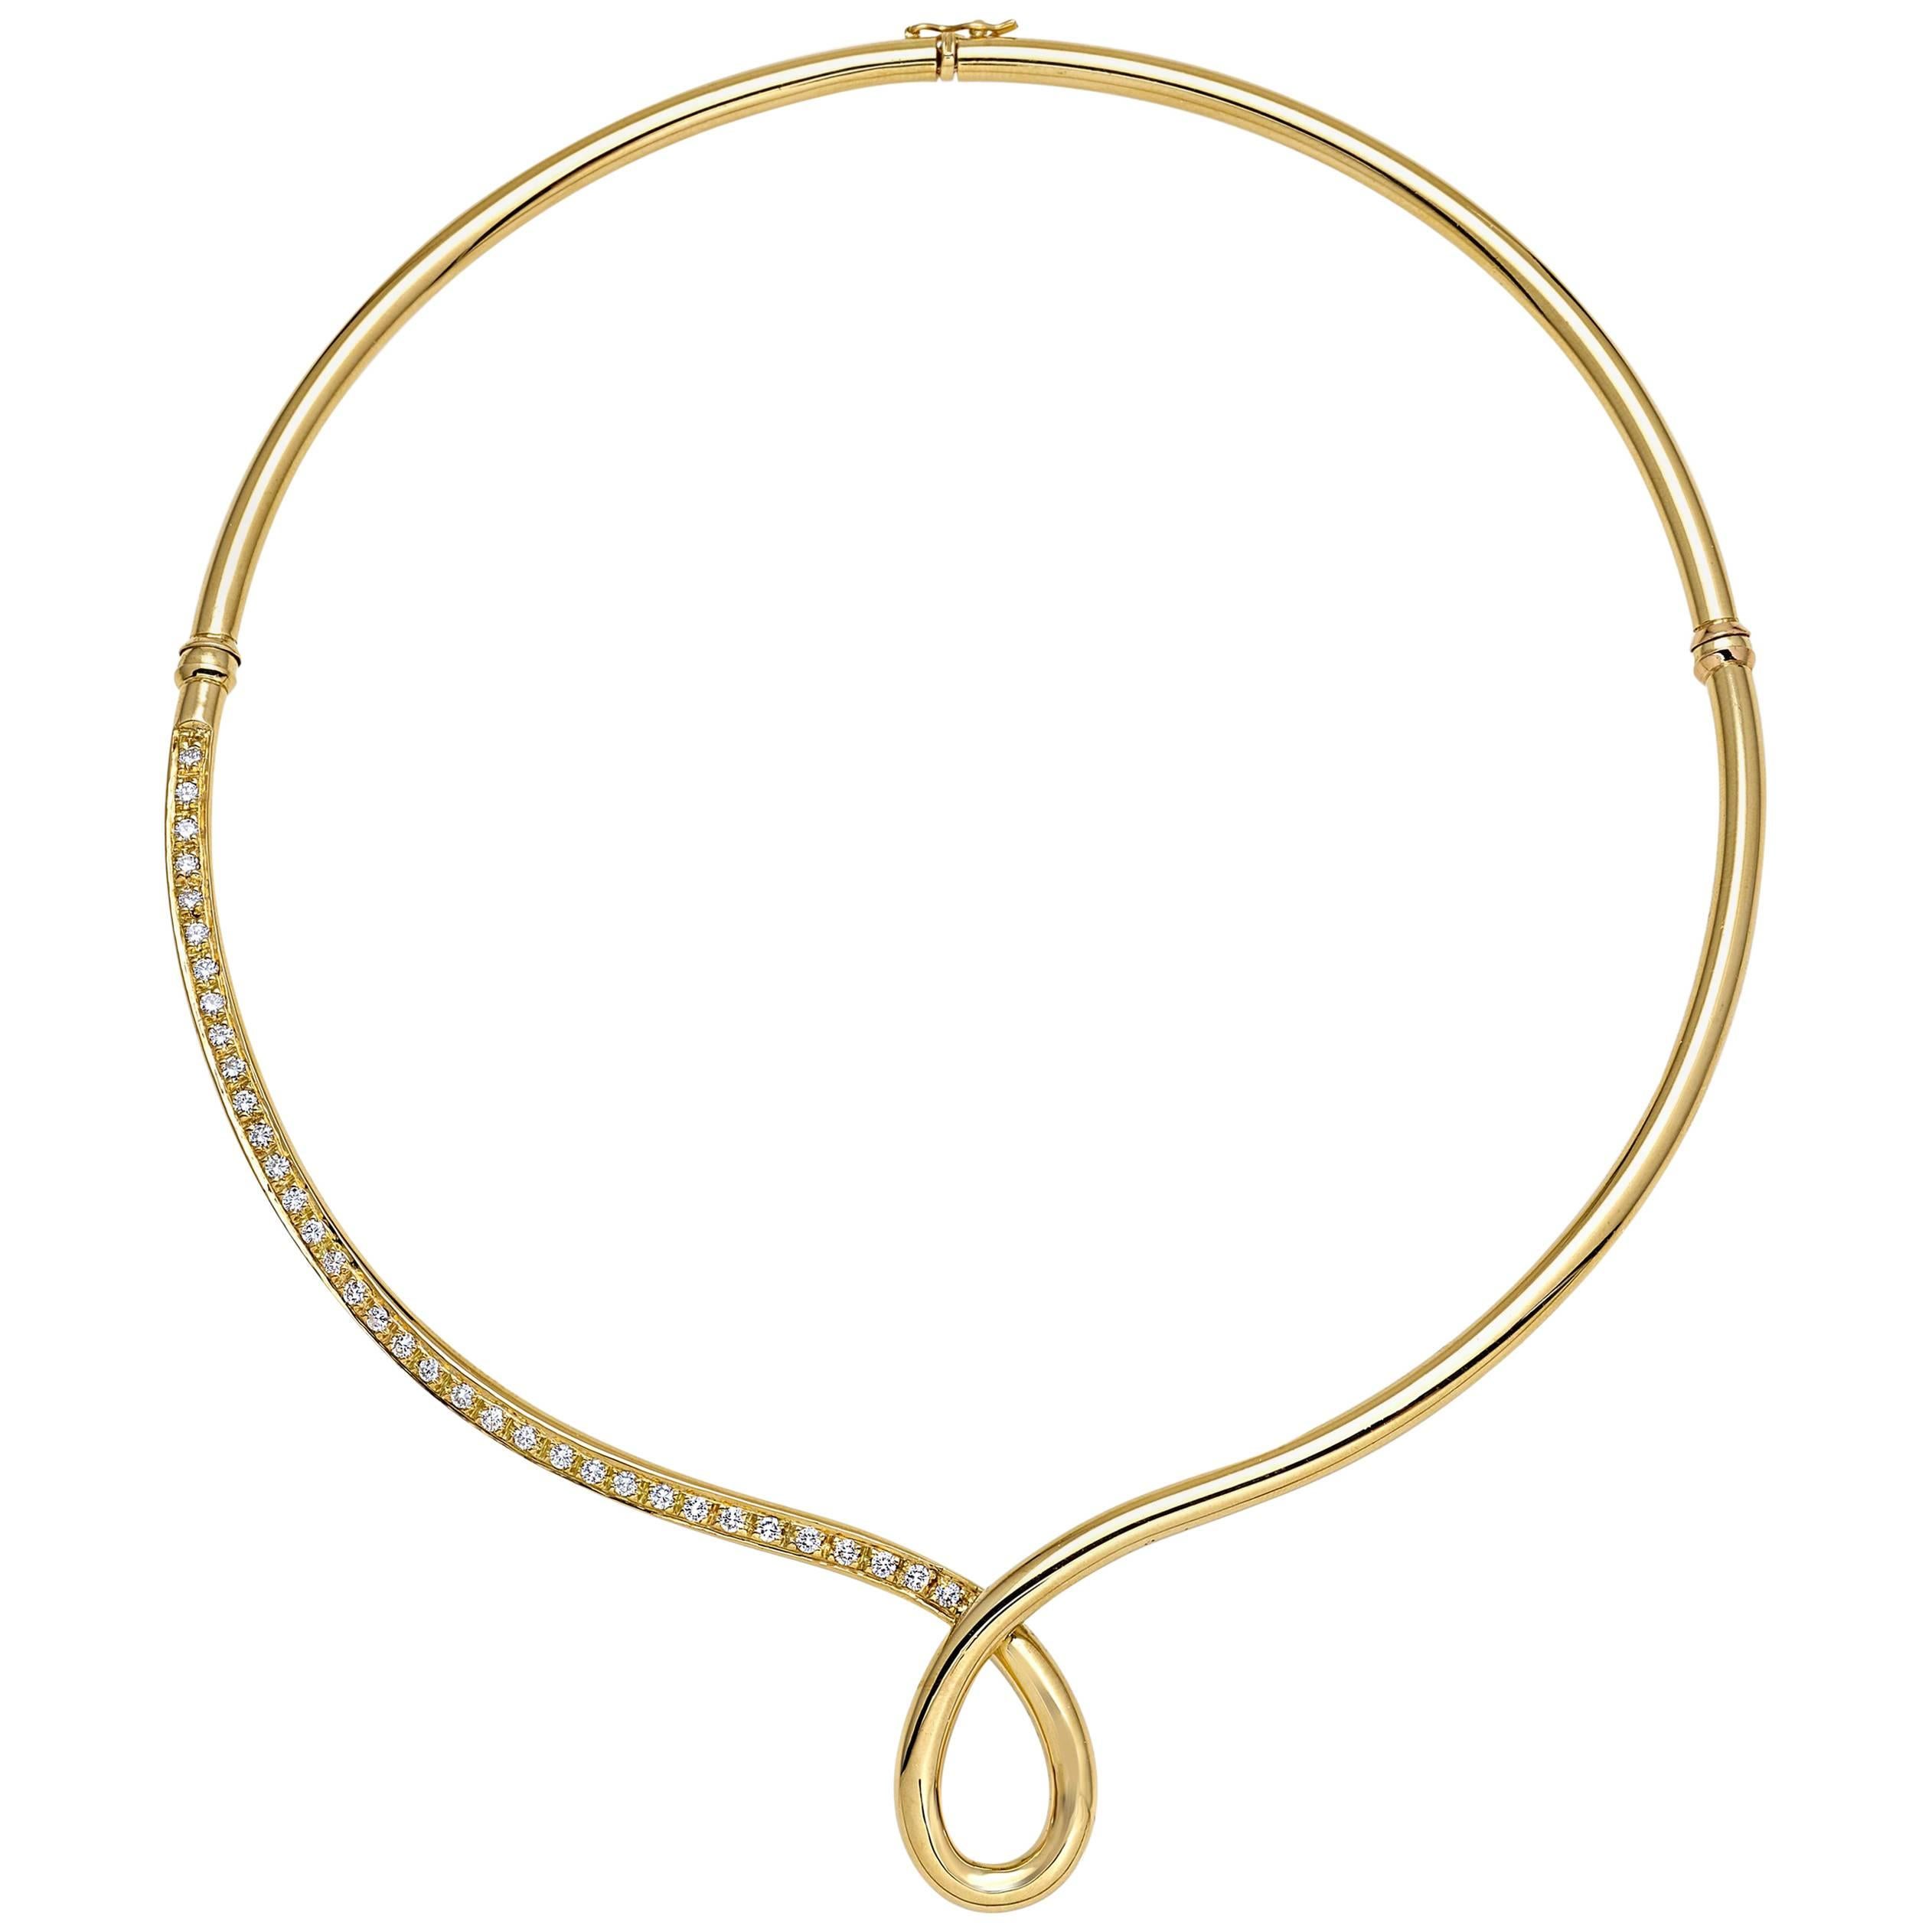 Necklace from the Collection "Essence" 18 Karat Yellow Gold and Diamonds For Sale